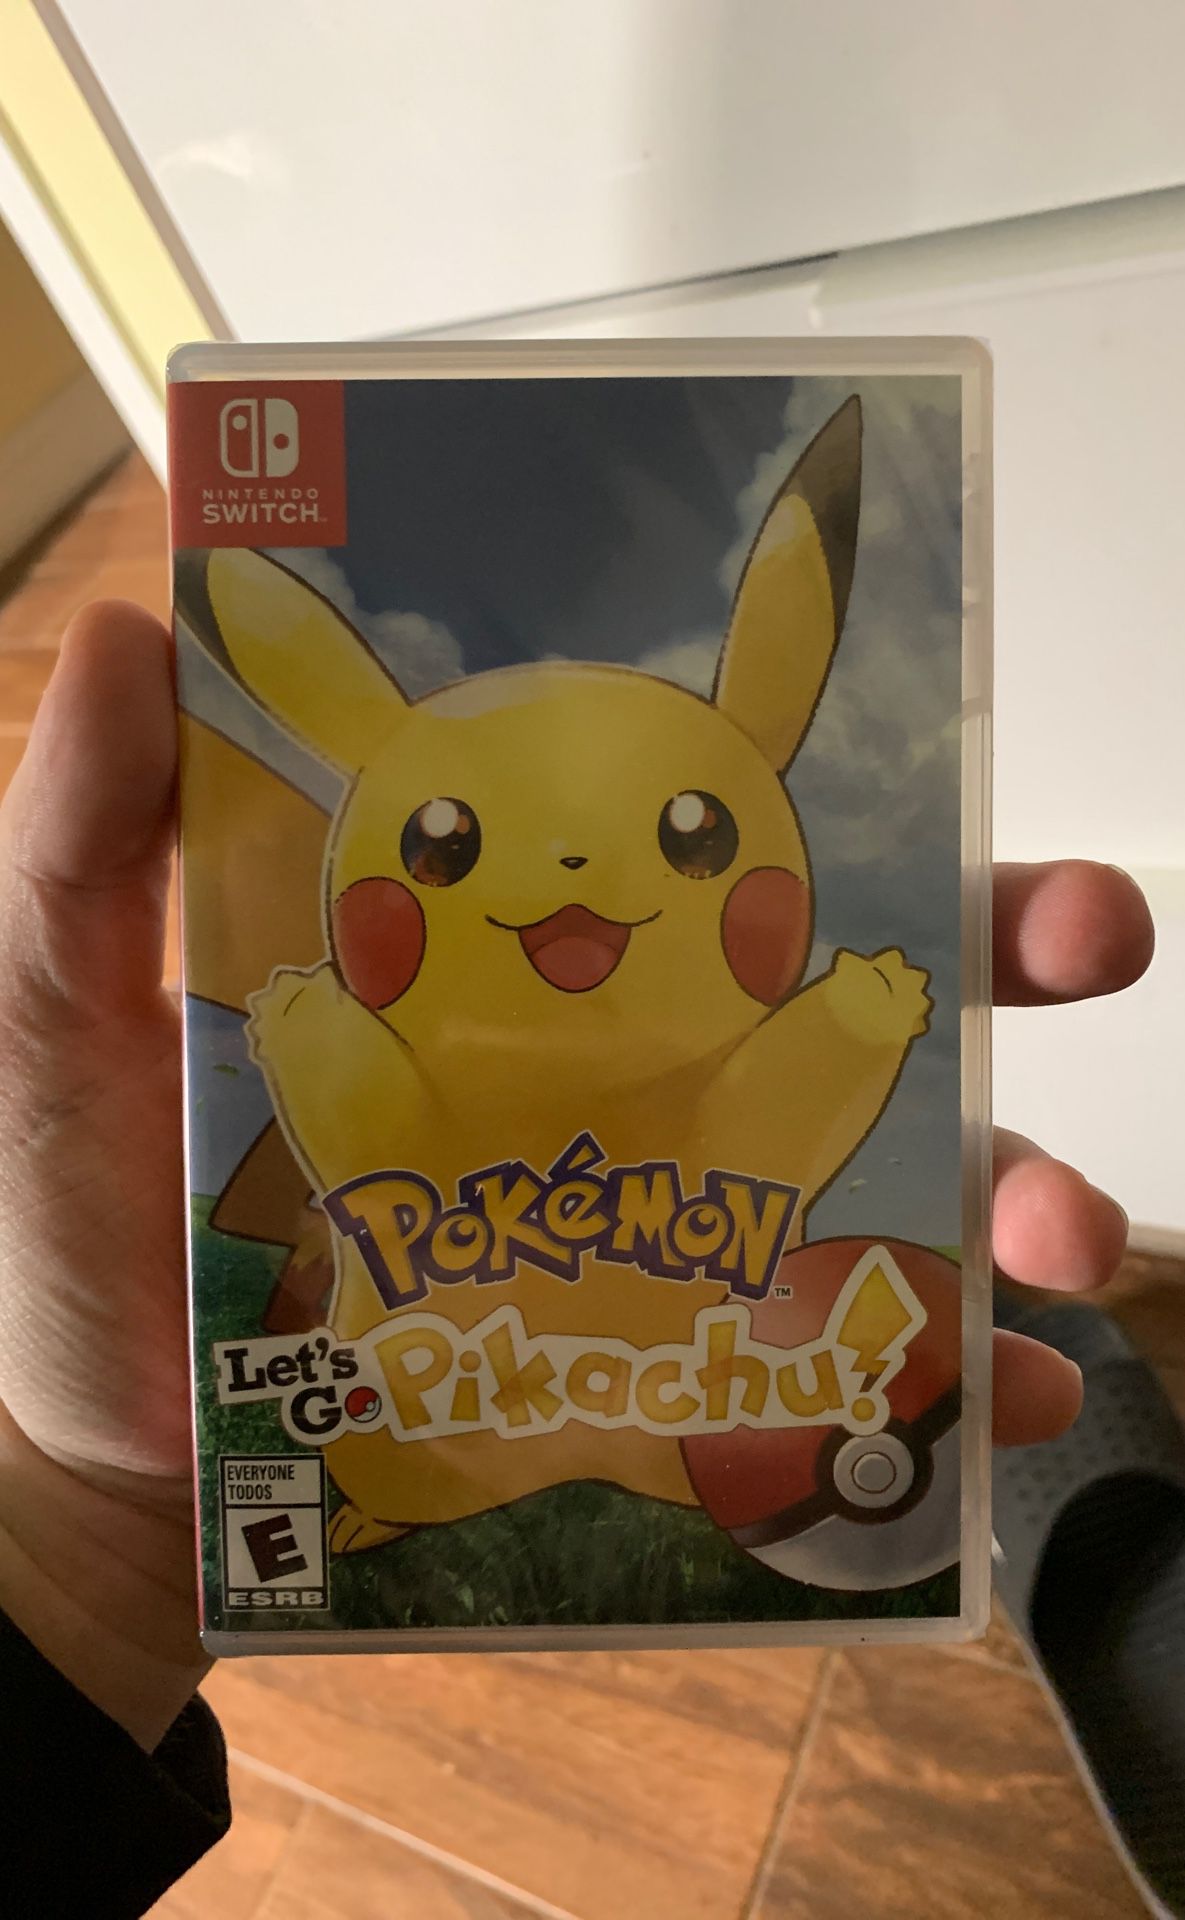 Brand New Pokémon: Let’s go Pikachu for the Nintendo Switch Gaming Console